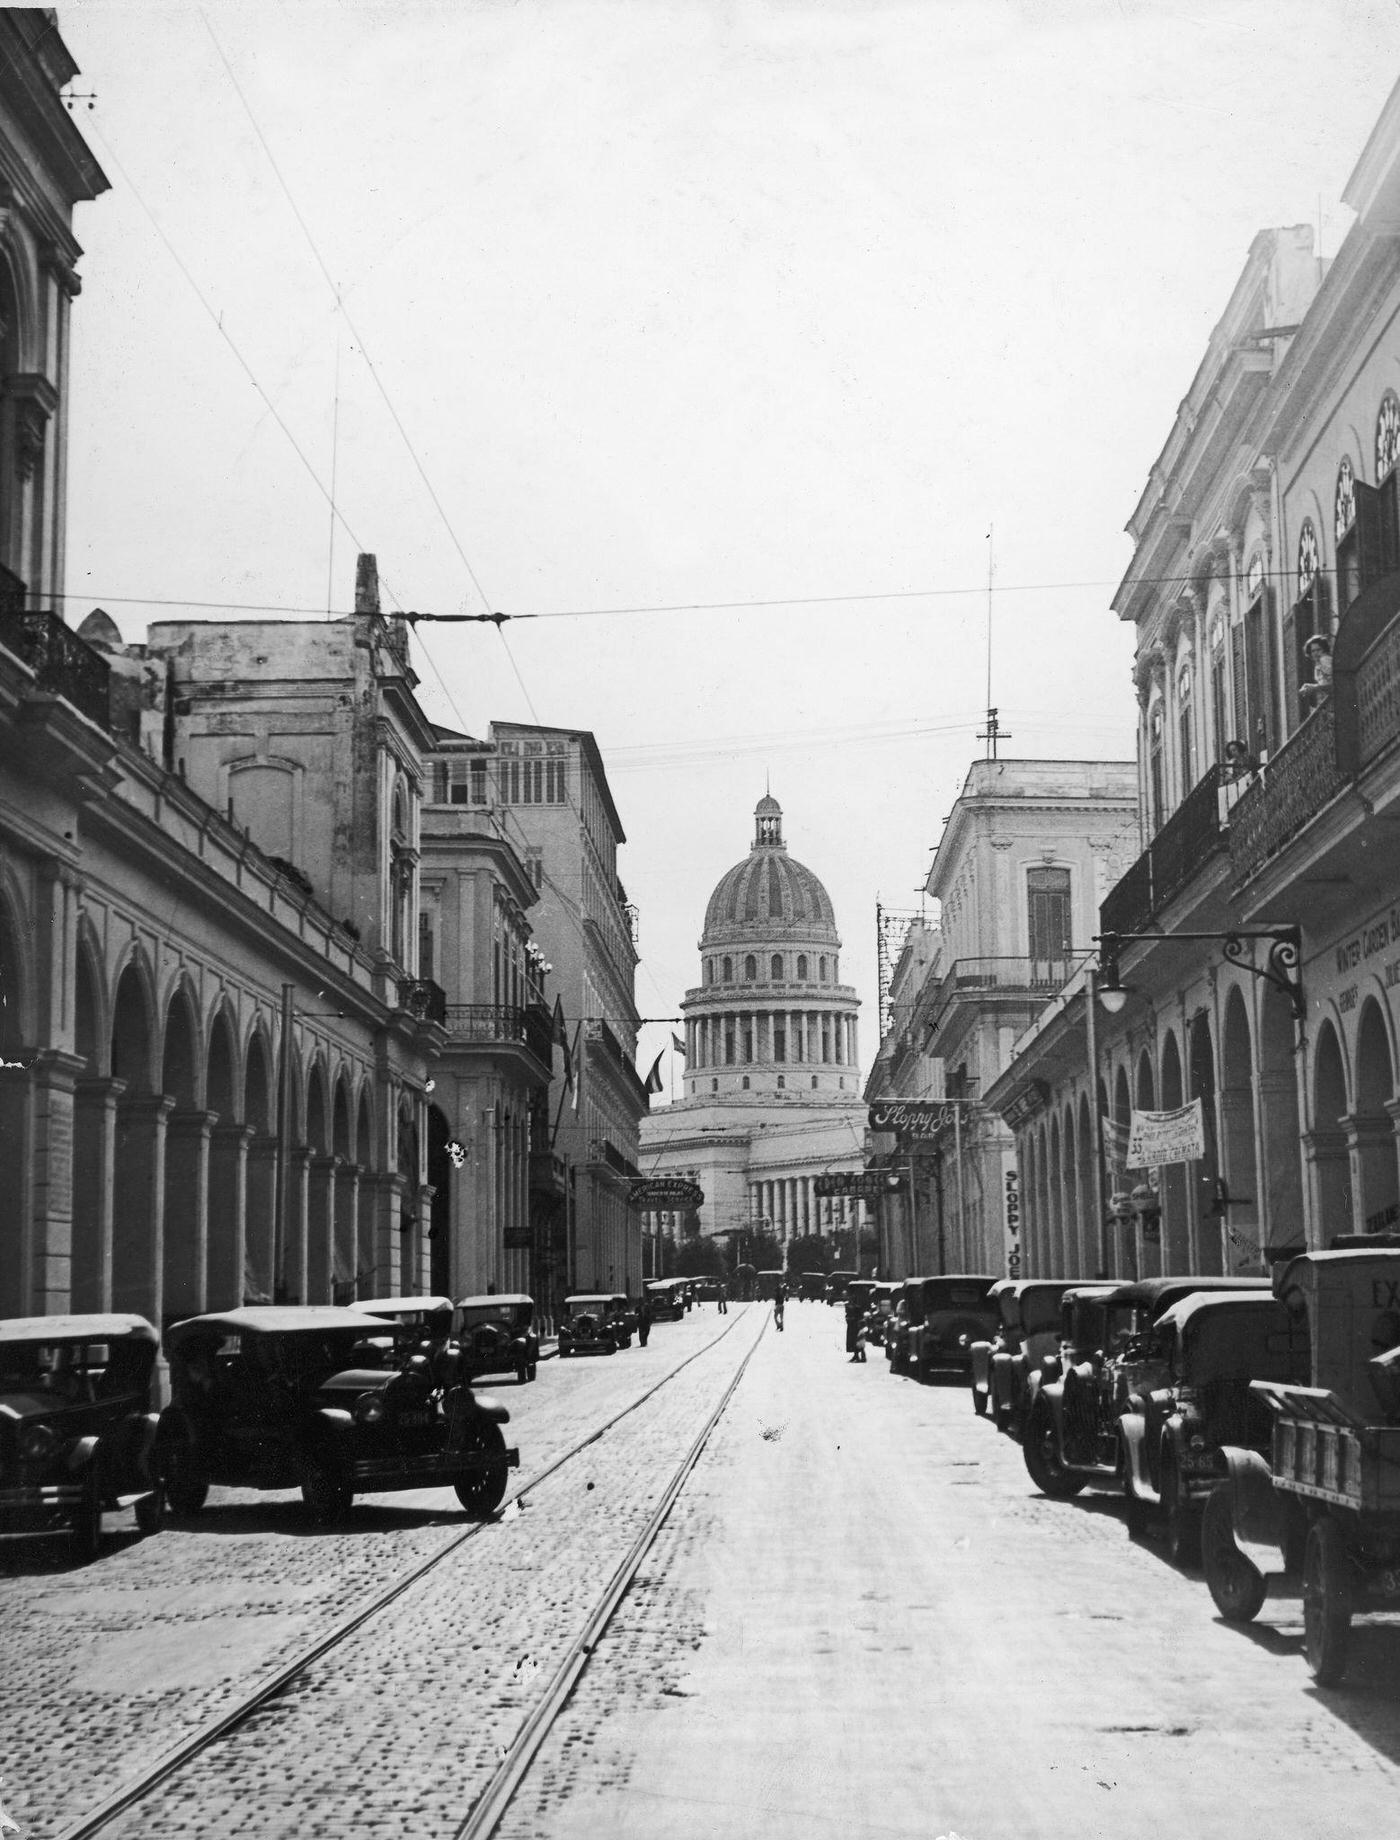 View of cars parked on Calle Zulueta with the Capitol building in the background, Havana, Cuba, 1935